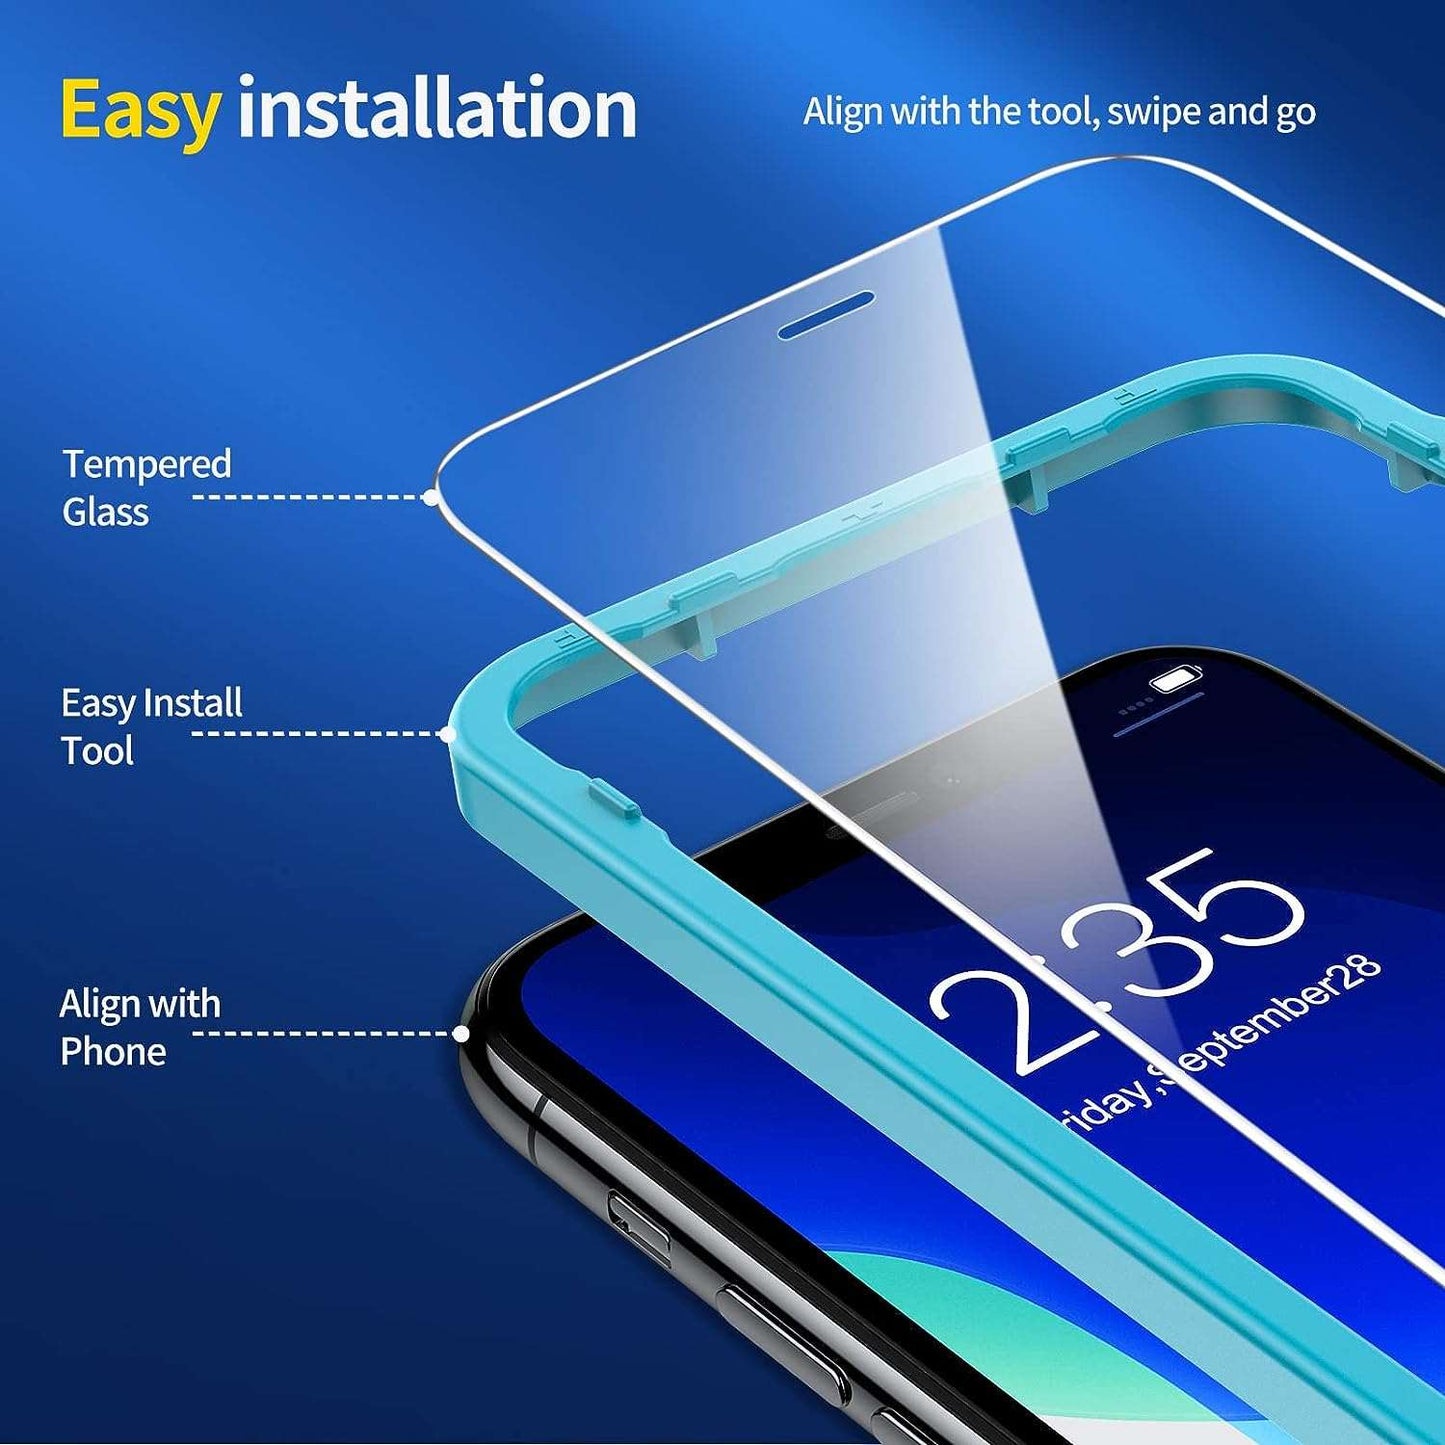 SmartDevil 3 Pack Screen Protector for iPhone 11/iPhone XR, 9H Tempered Glass, Anti-Scratch, Easy Installation Tray, Anti-Oil, Anti-Bubble, Case-Friendly, Transparent Screen Protector Tempered Glass Film for iPhone 11/iPhone XR[6.1 Inch]